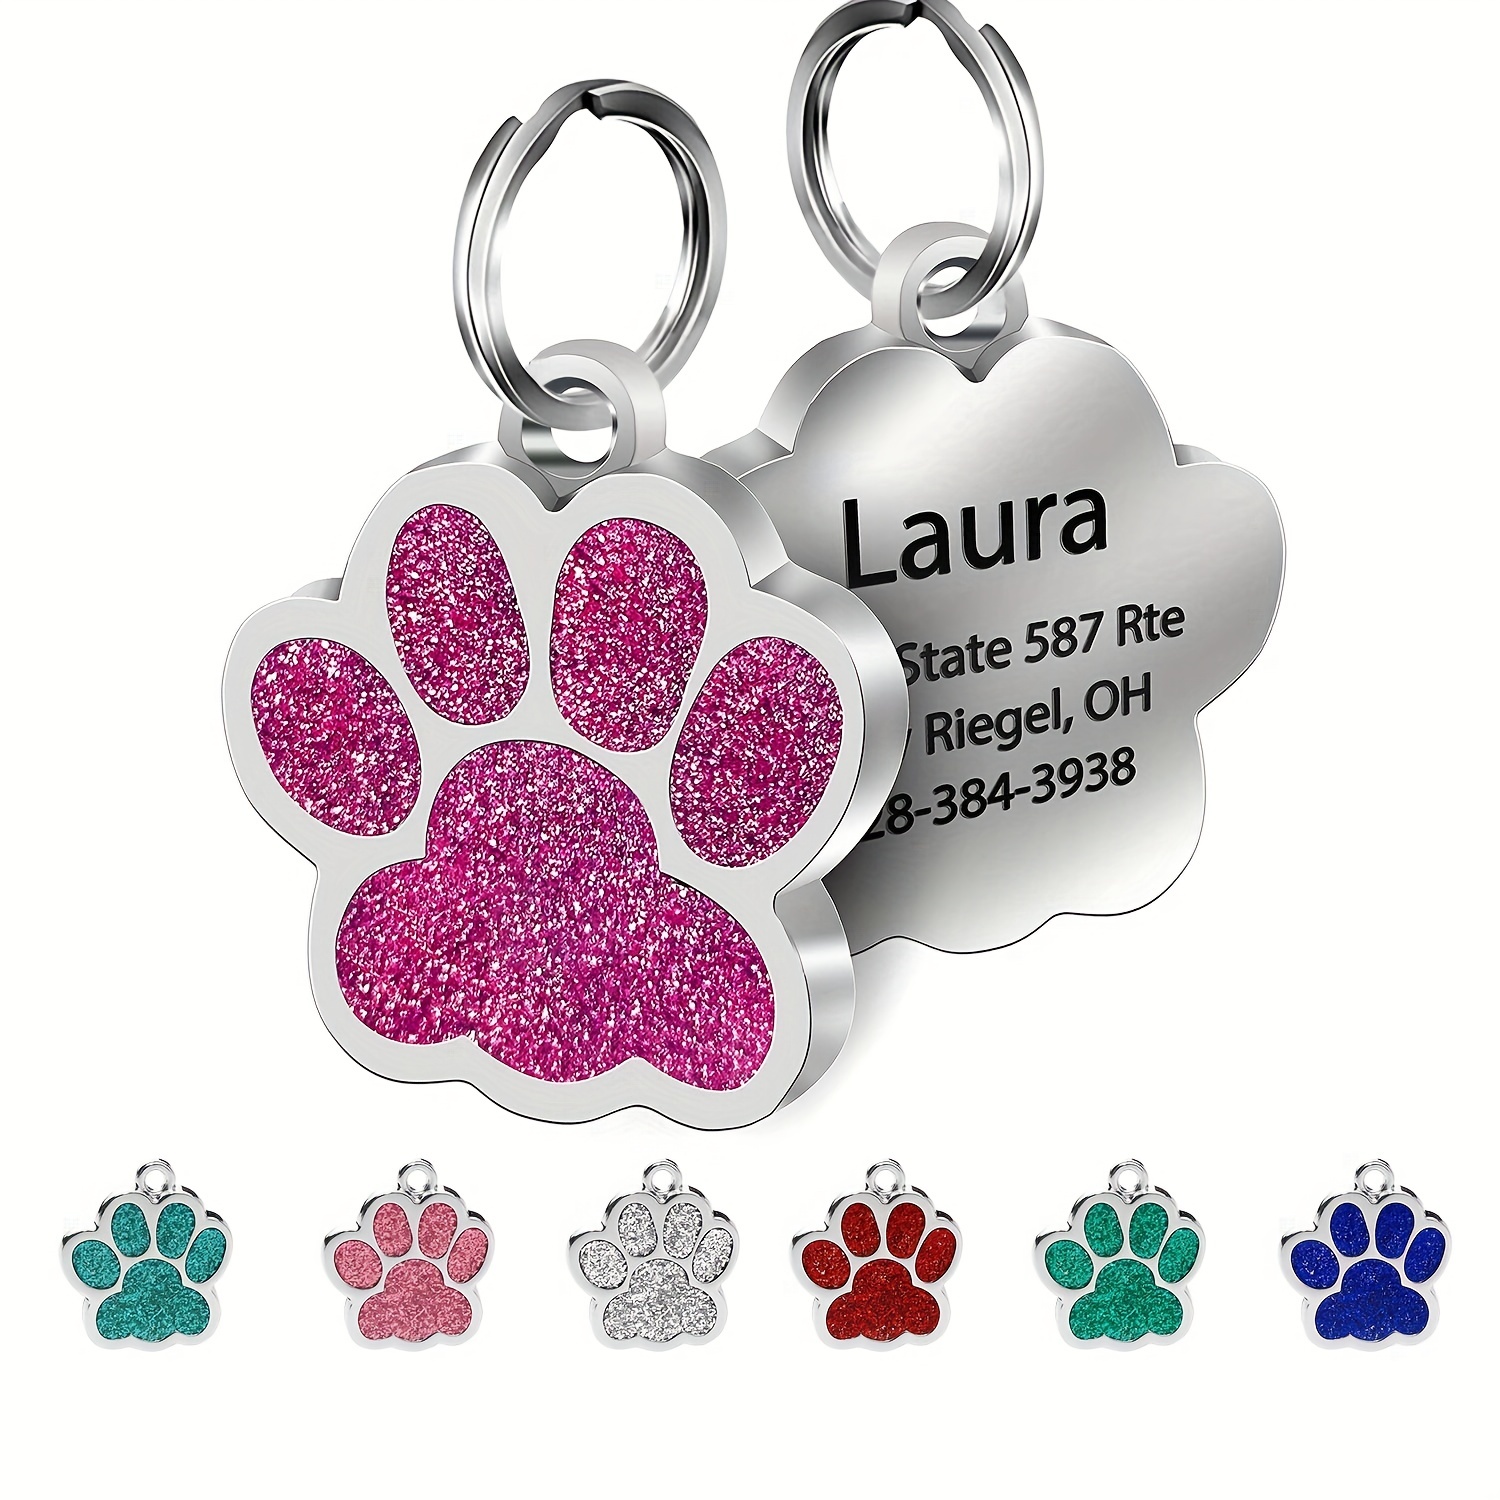 

Personalized Glitter Paw Print Pet Id Tags For Dogs And Cats - Engraved With Name, Phone Number, And Address - Anti-lost Charm For Small, Medium, And Large Pets